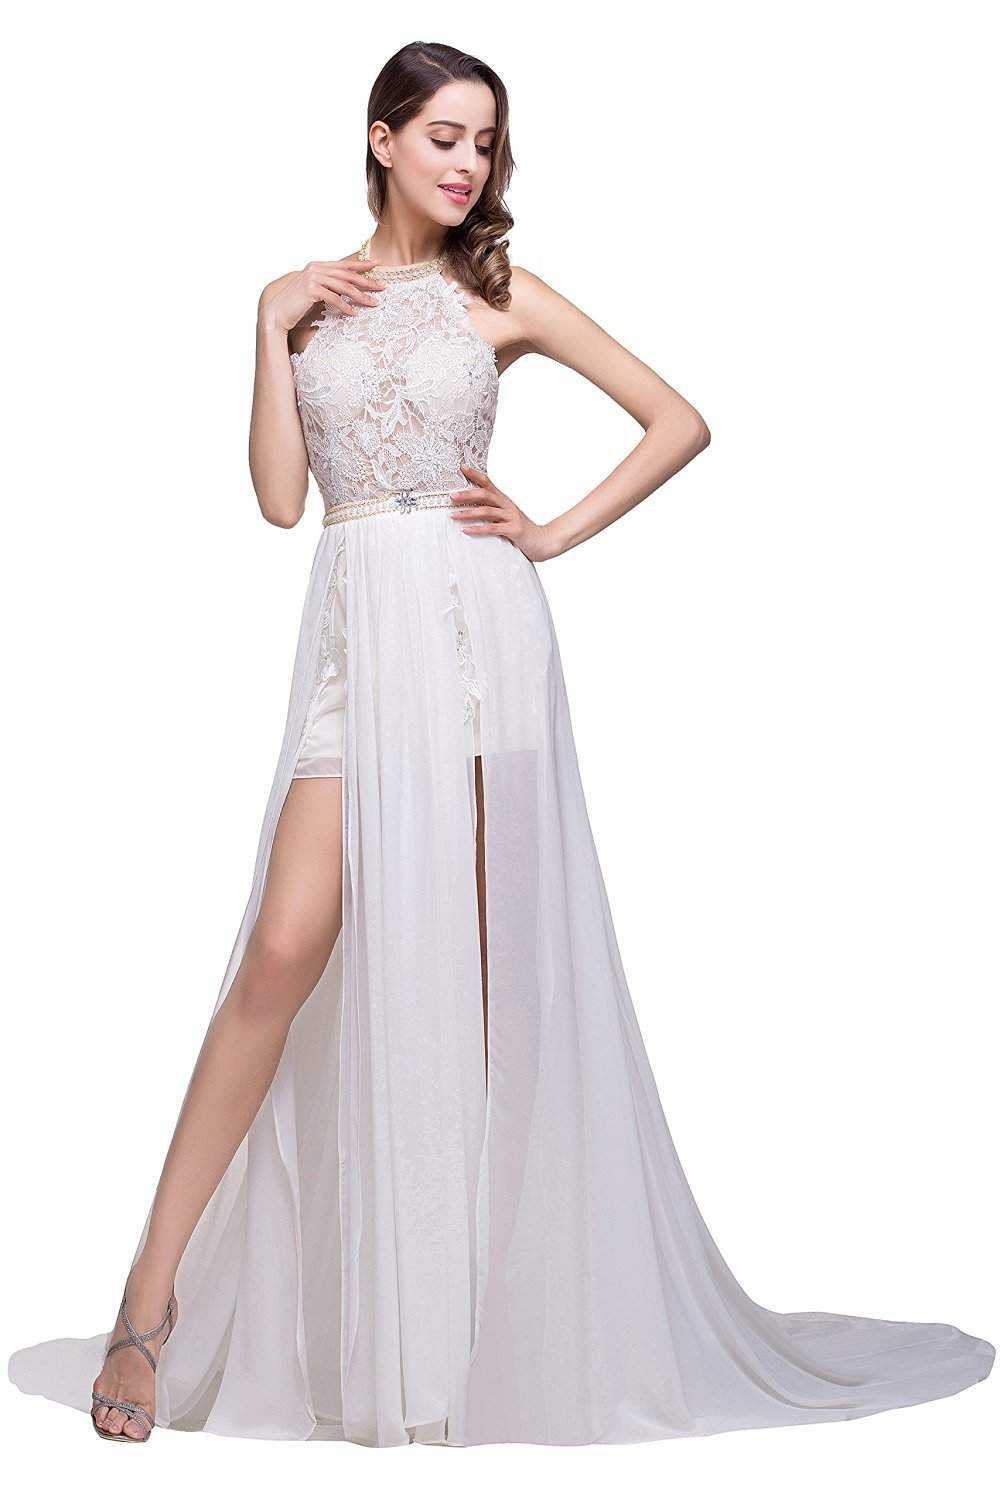 Discounted Wedding Gowns
 Top 50 Best Cheap Wedding Dresses pare Buy & Save